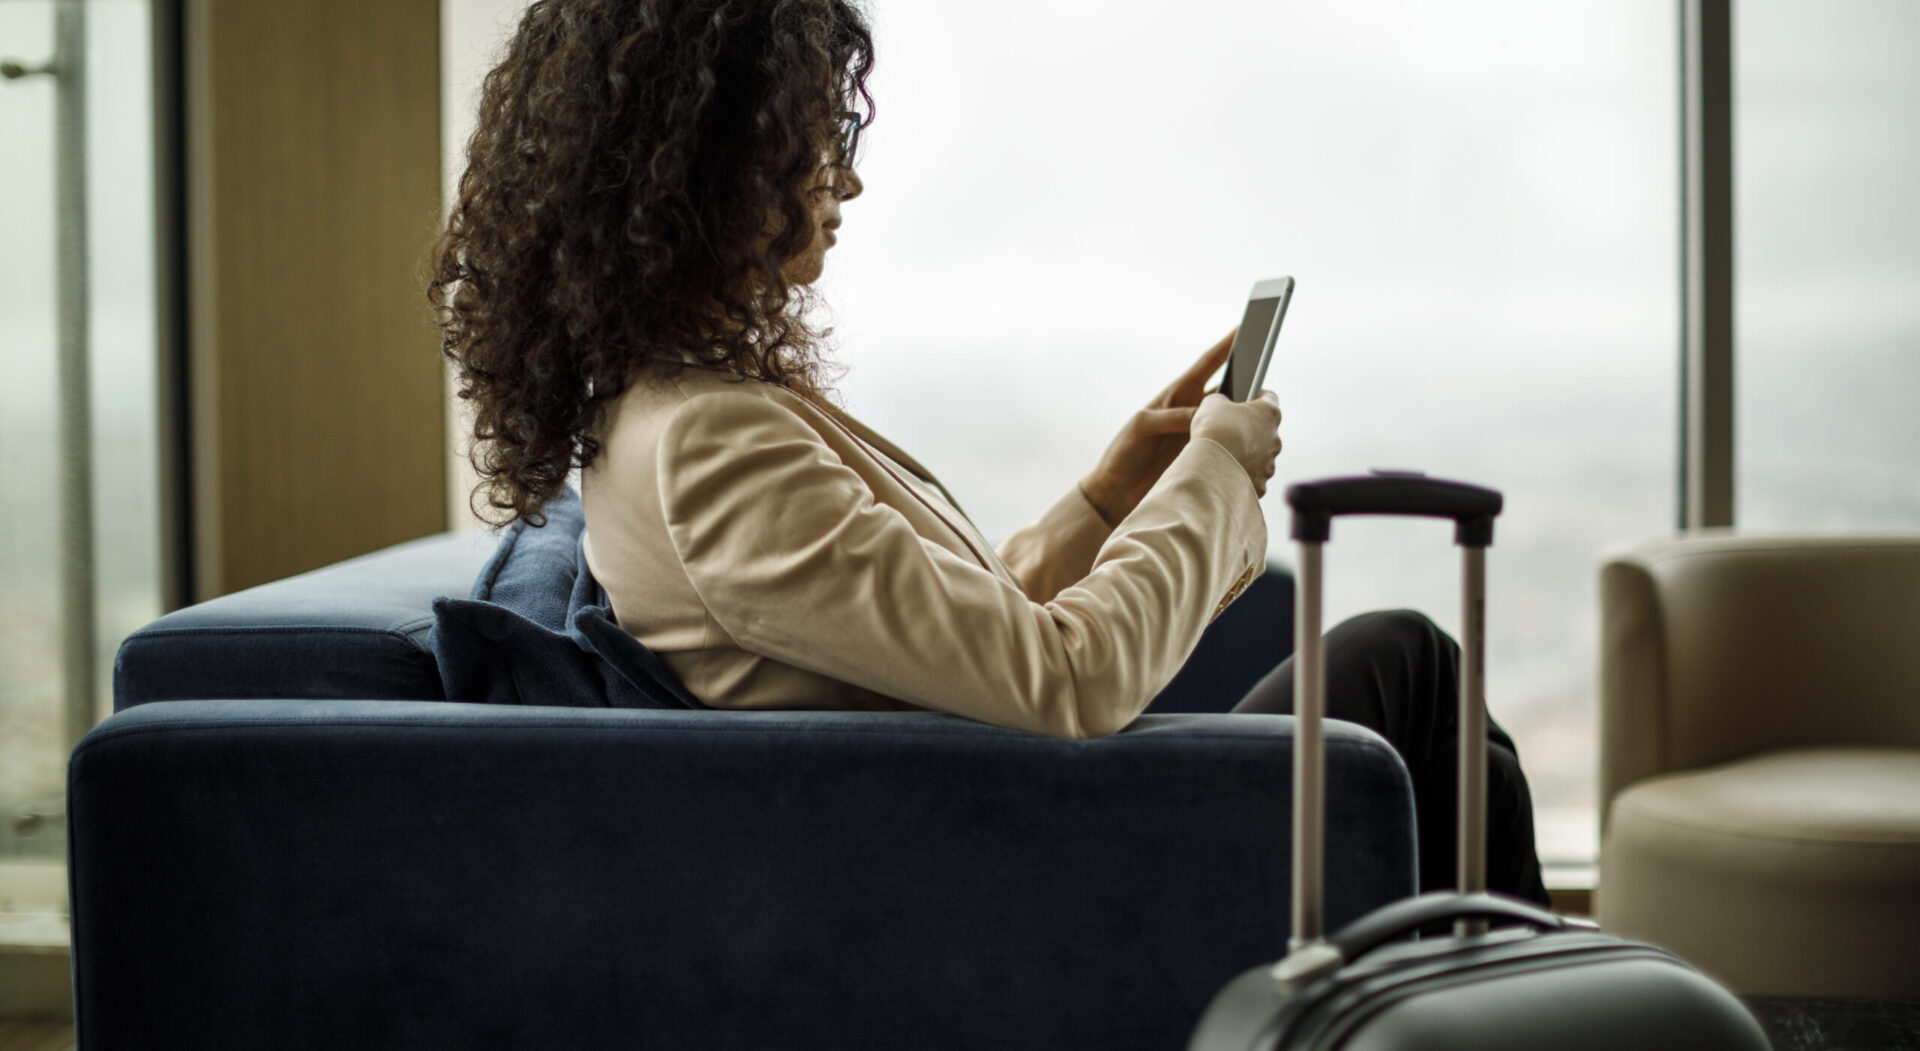 Businesswoman using mobile phone in airport waiting area